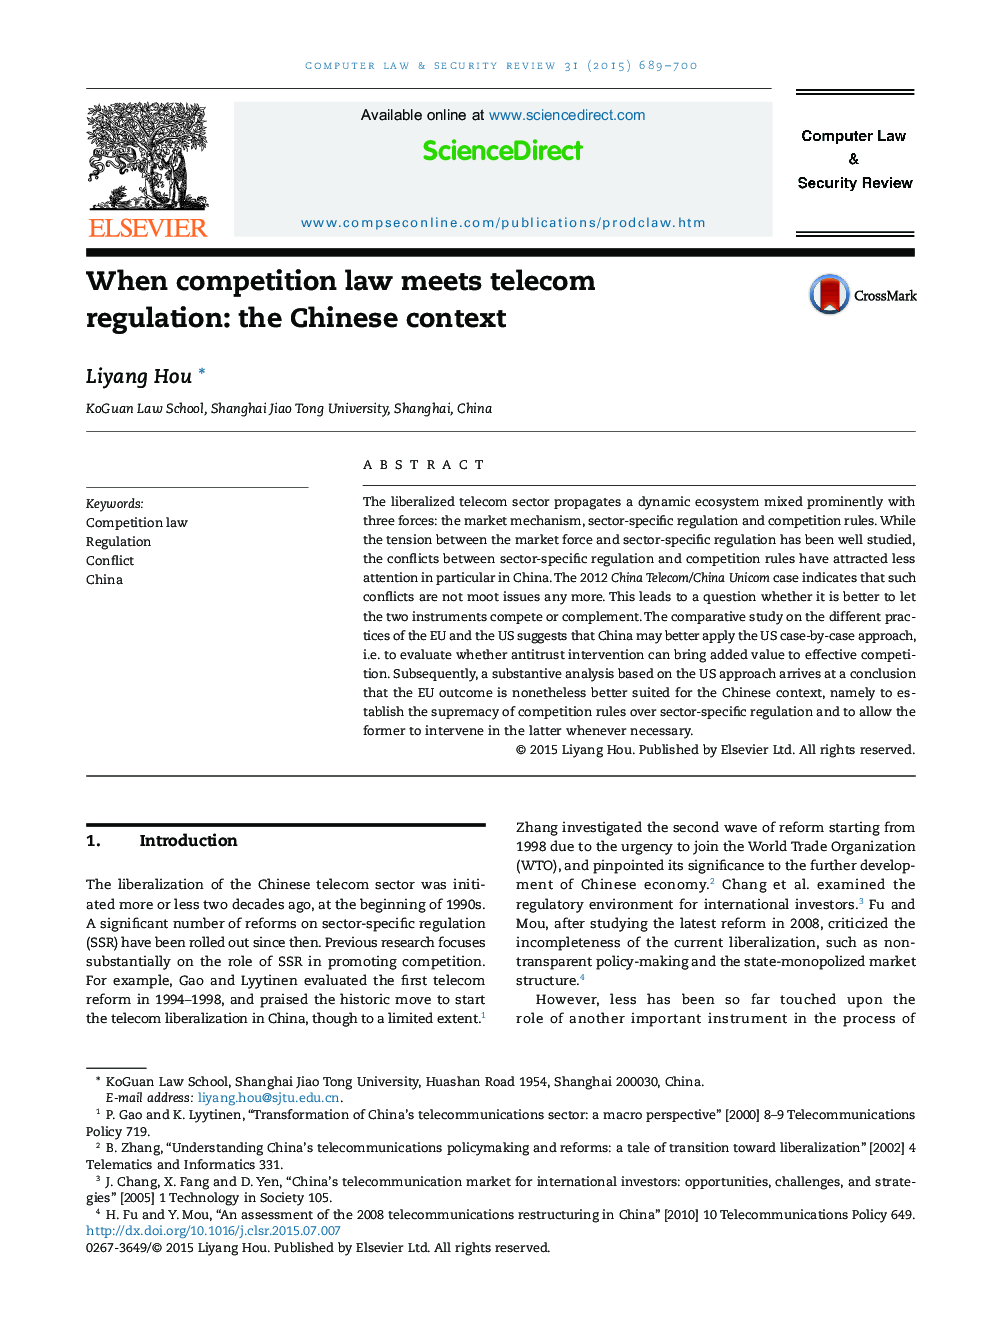 When competition law meets telecom regulation: the Chinese context